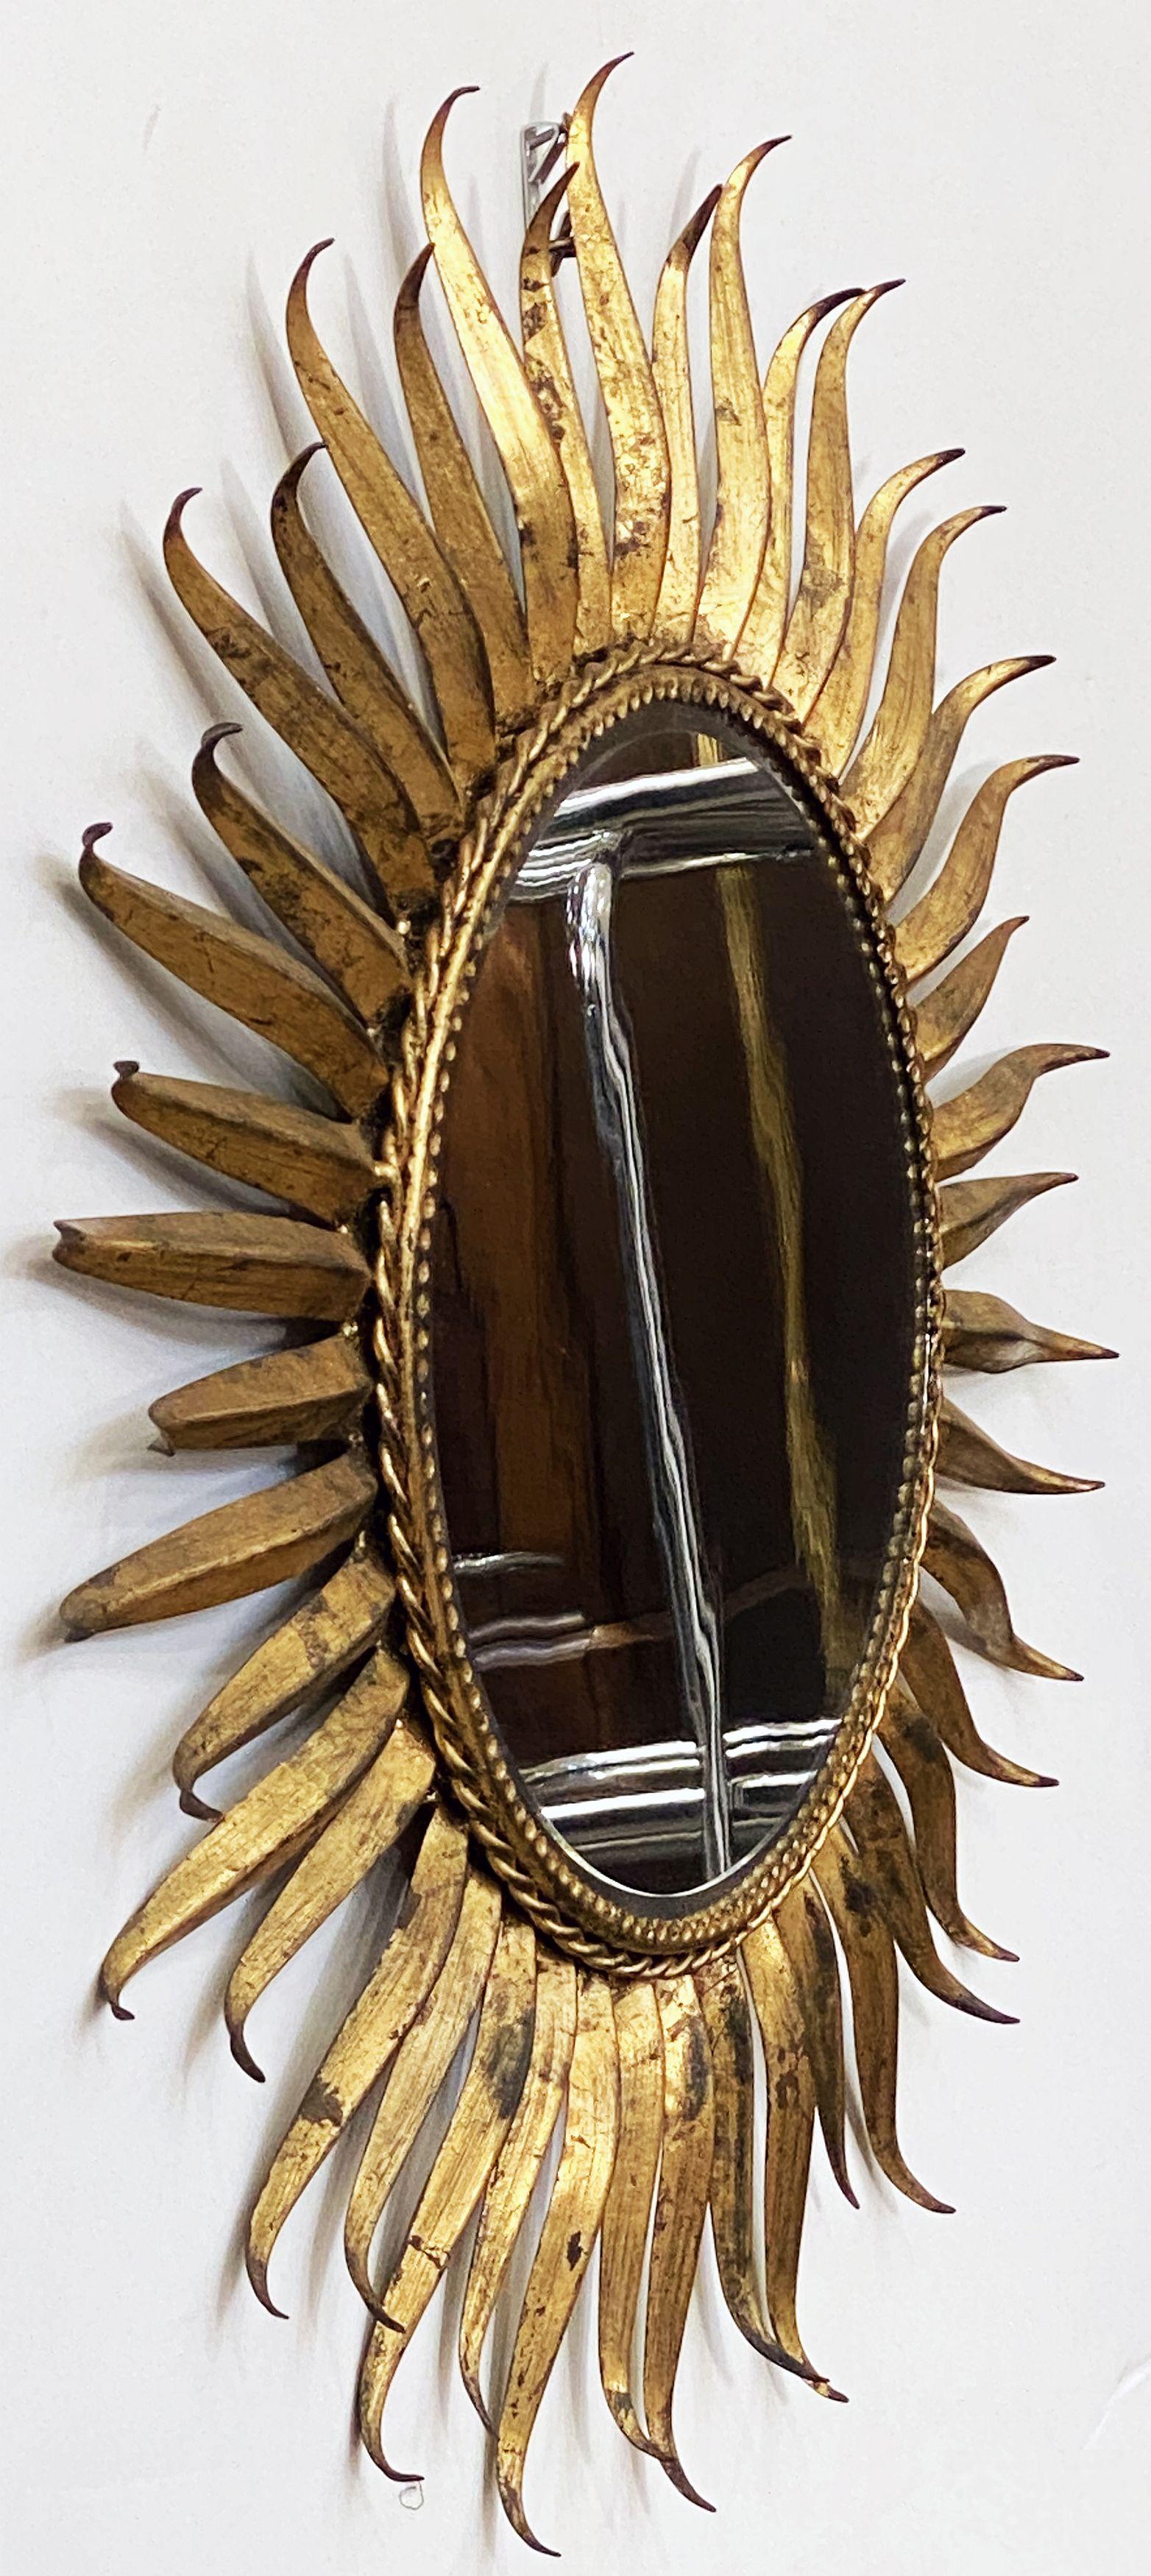 A lovely French sunburst (or starburst) mirror of gilt metal with featuring a frame with an elegant design of rays emanating from a mirrored glass center.

Diameter is 24 inches.